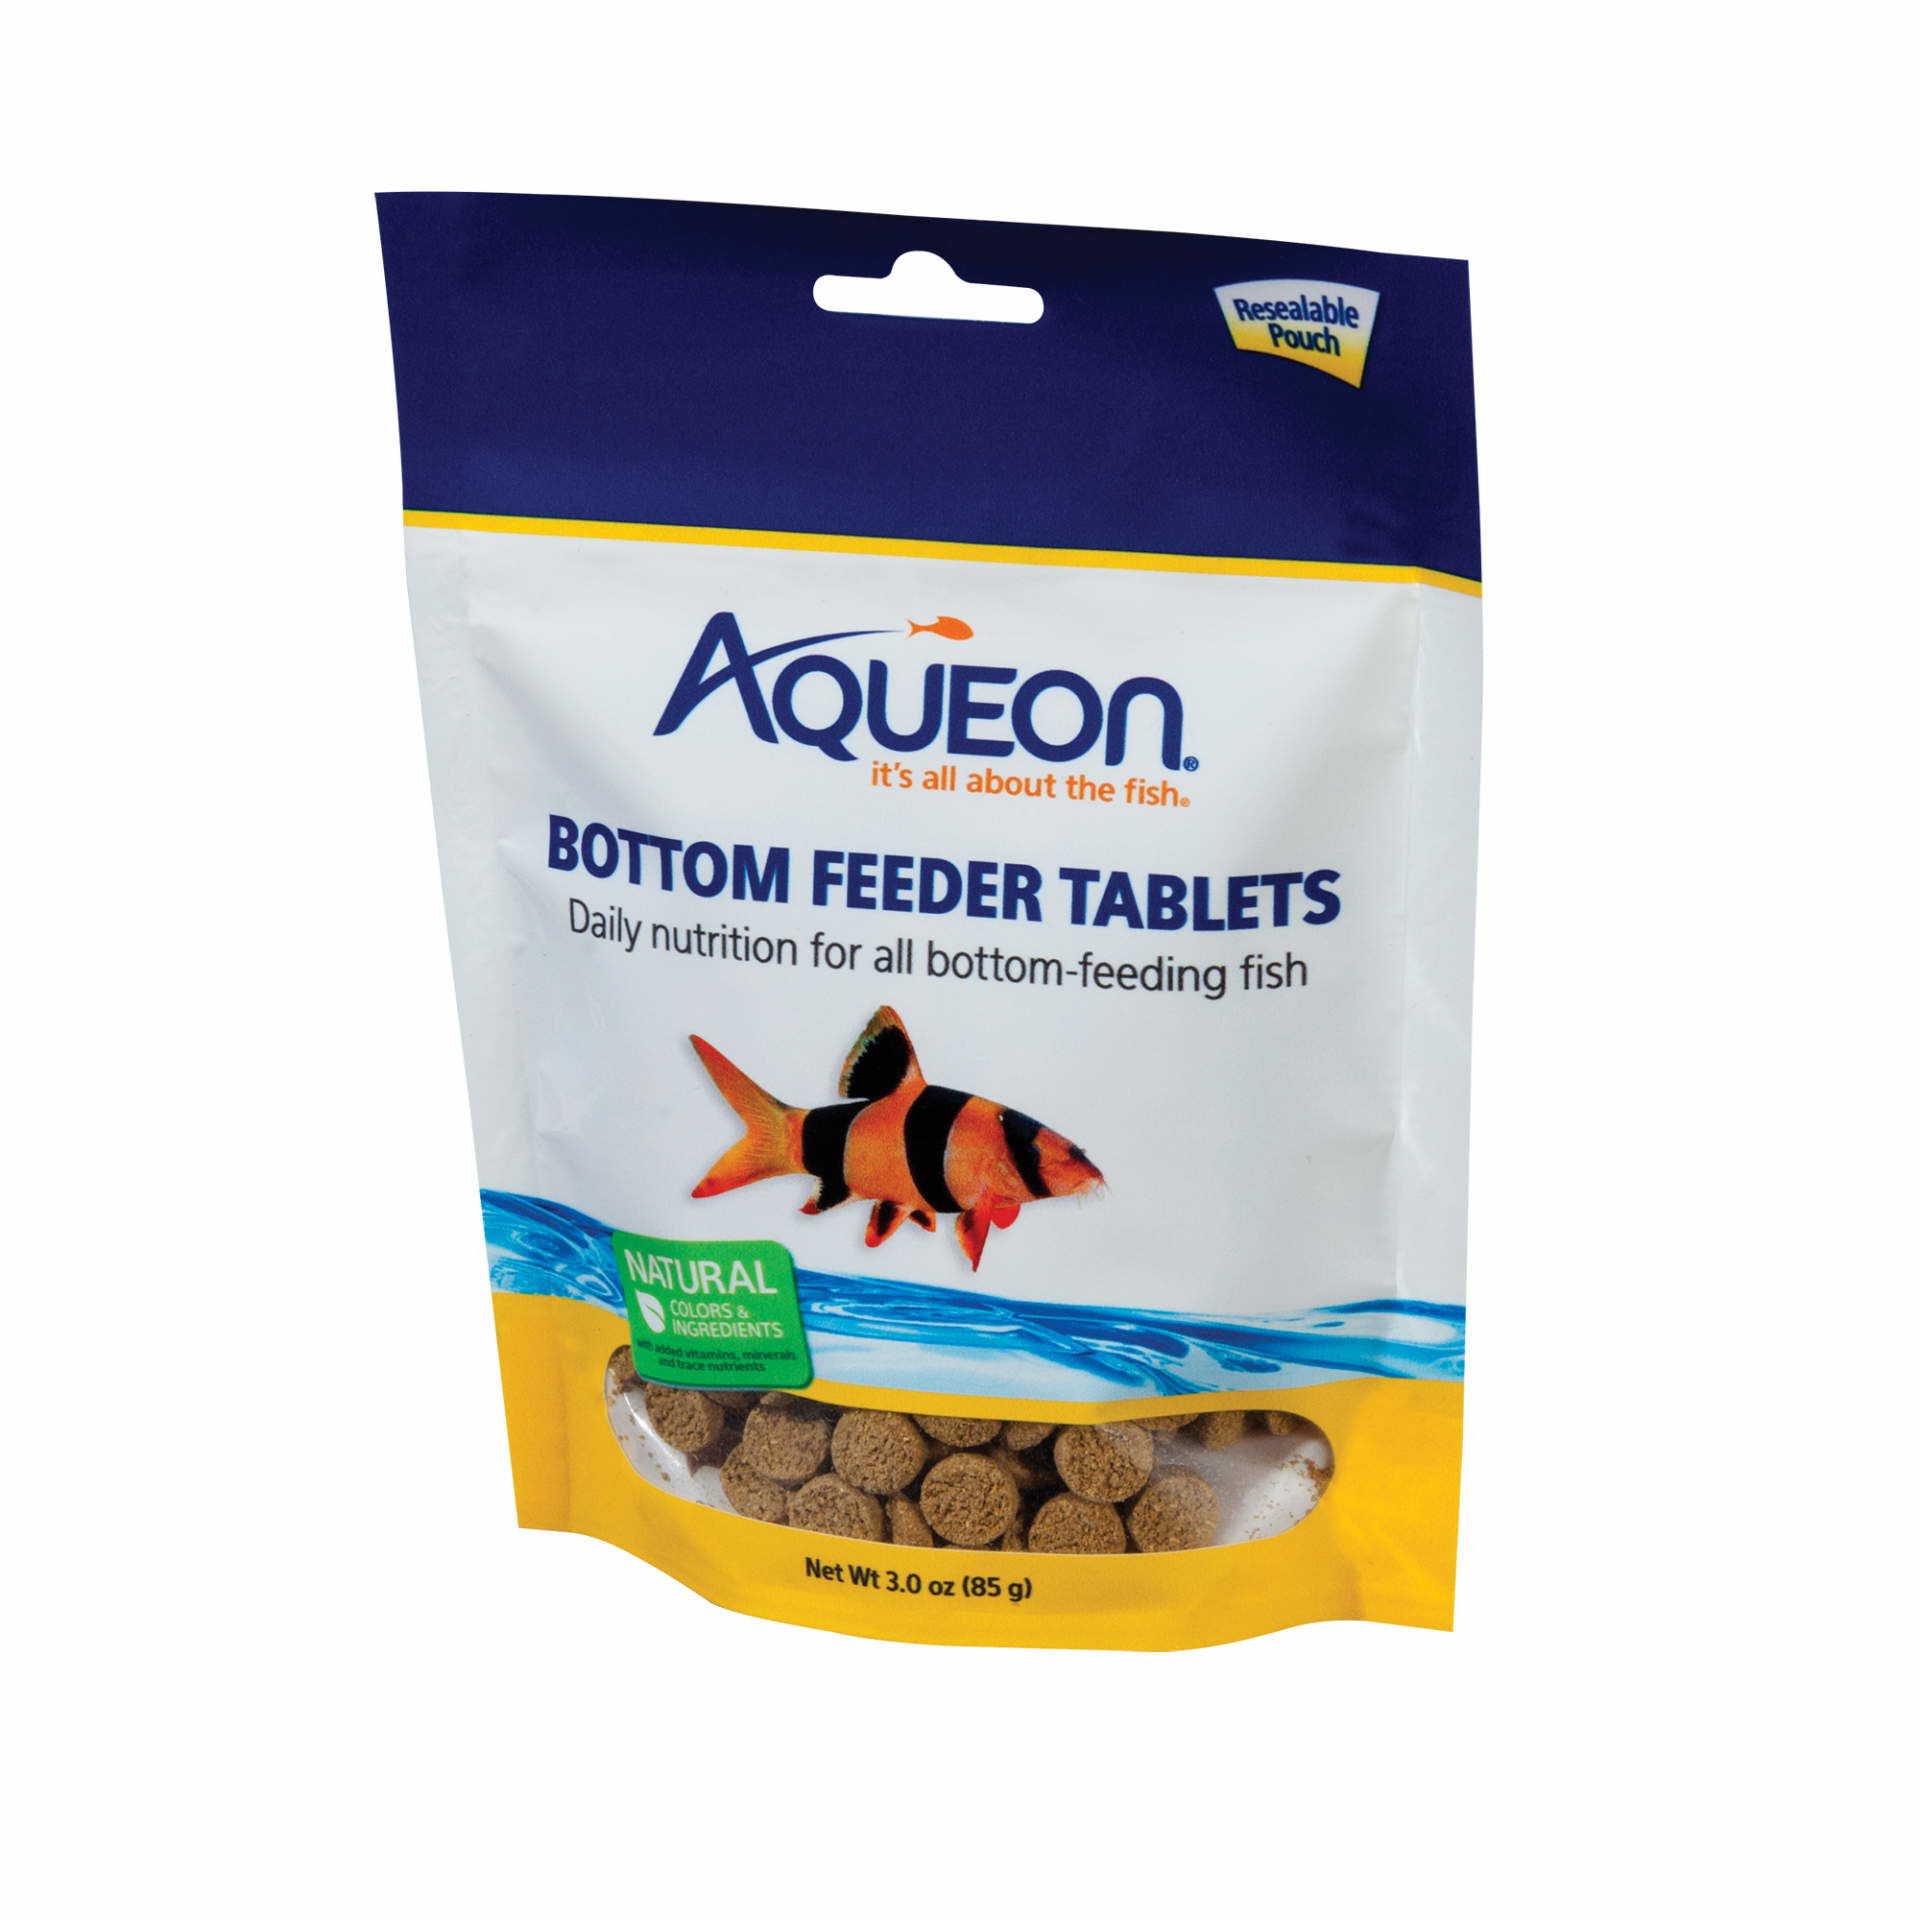 Aqueon Bottom Feeder Fish Food 36 3 ounce tablets,Ideal for bottom dwelling  fish such as plecostomus, loaches, catfish, shrimp and more.